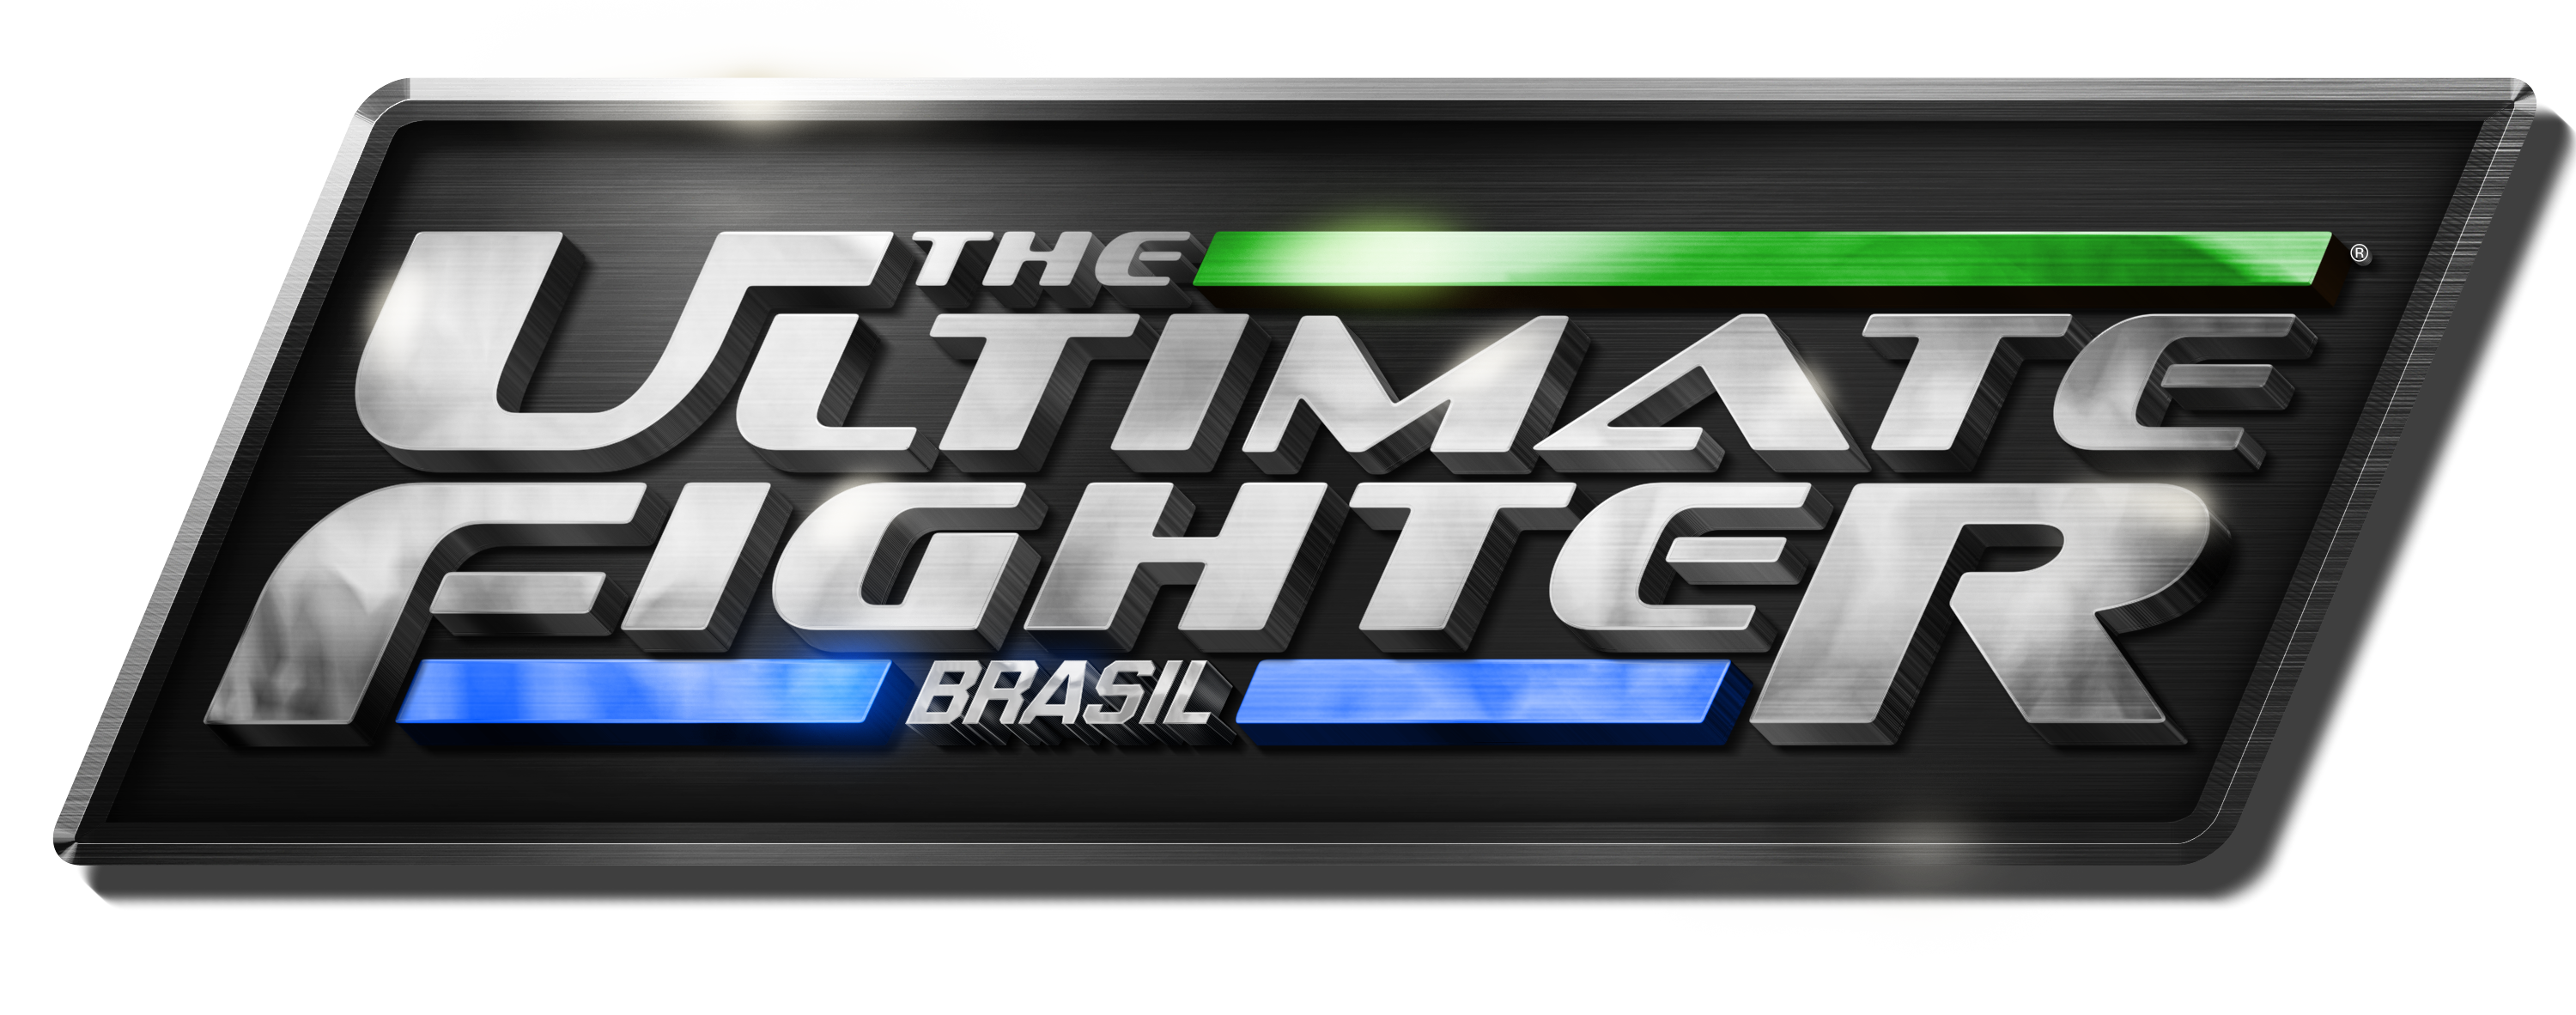 The Ultimate Fighter - Wikipedia